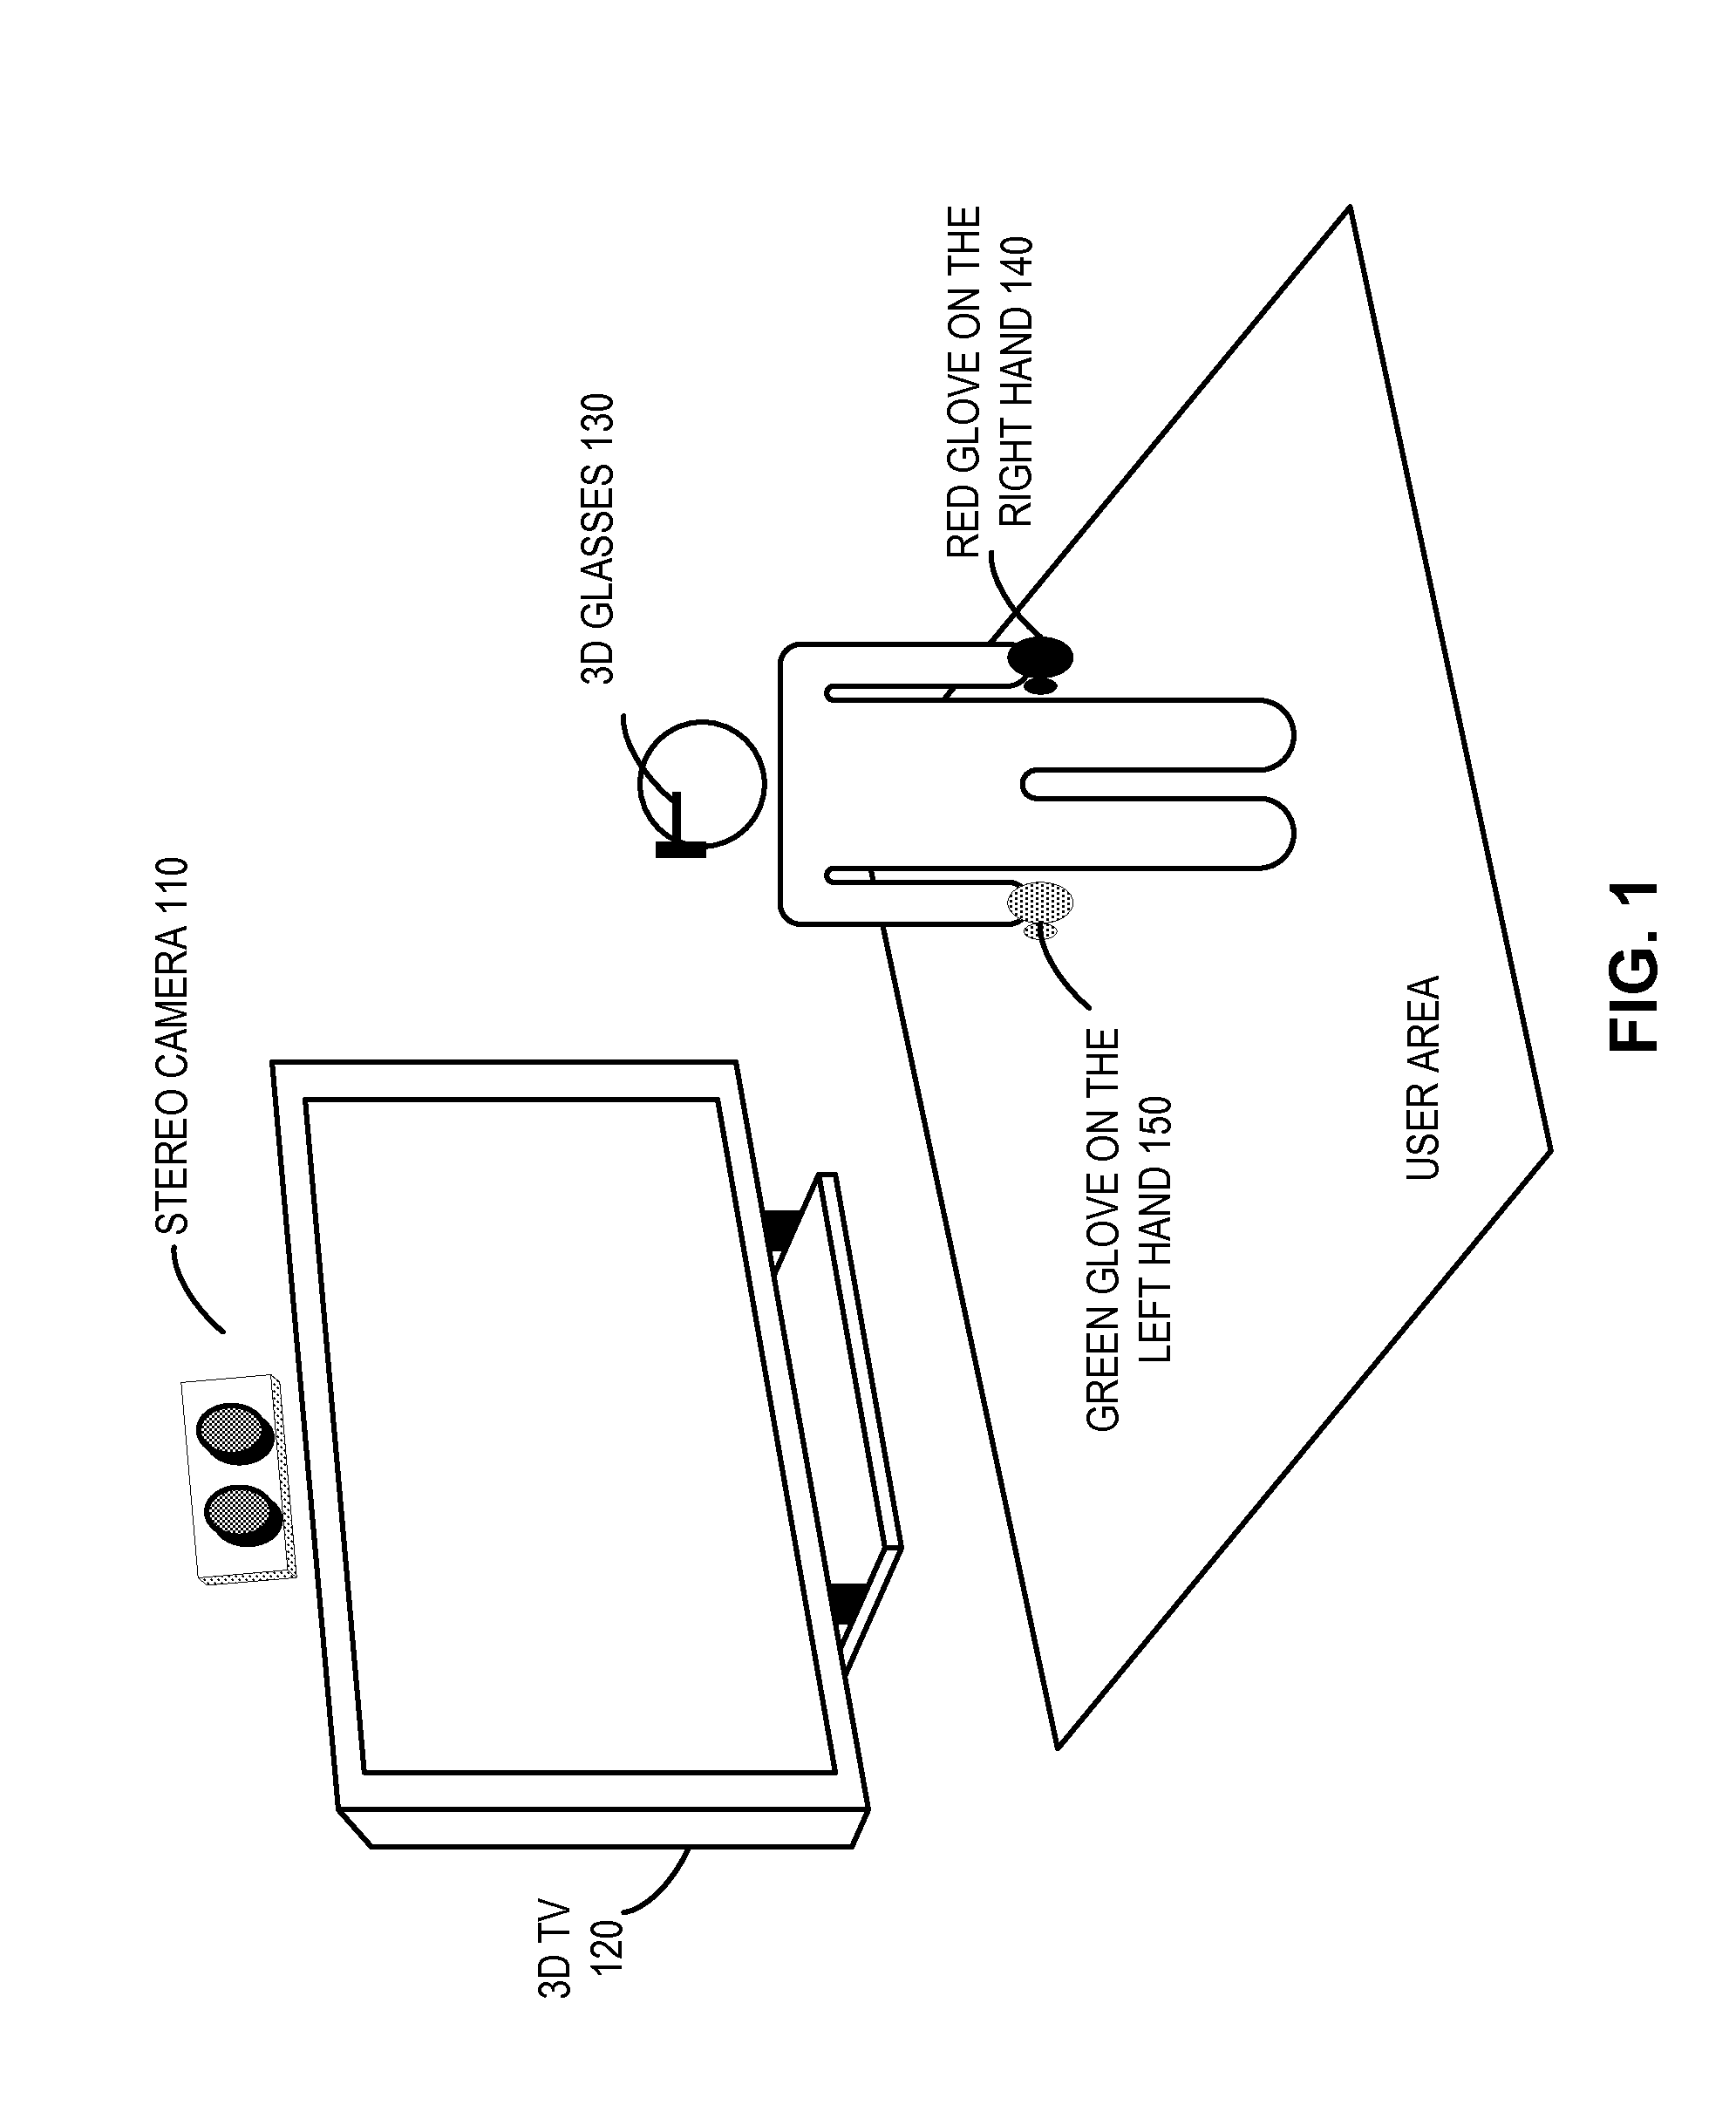 Combined stereo camera and stereo display interaction